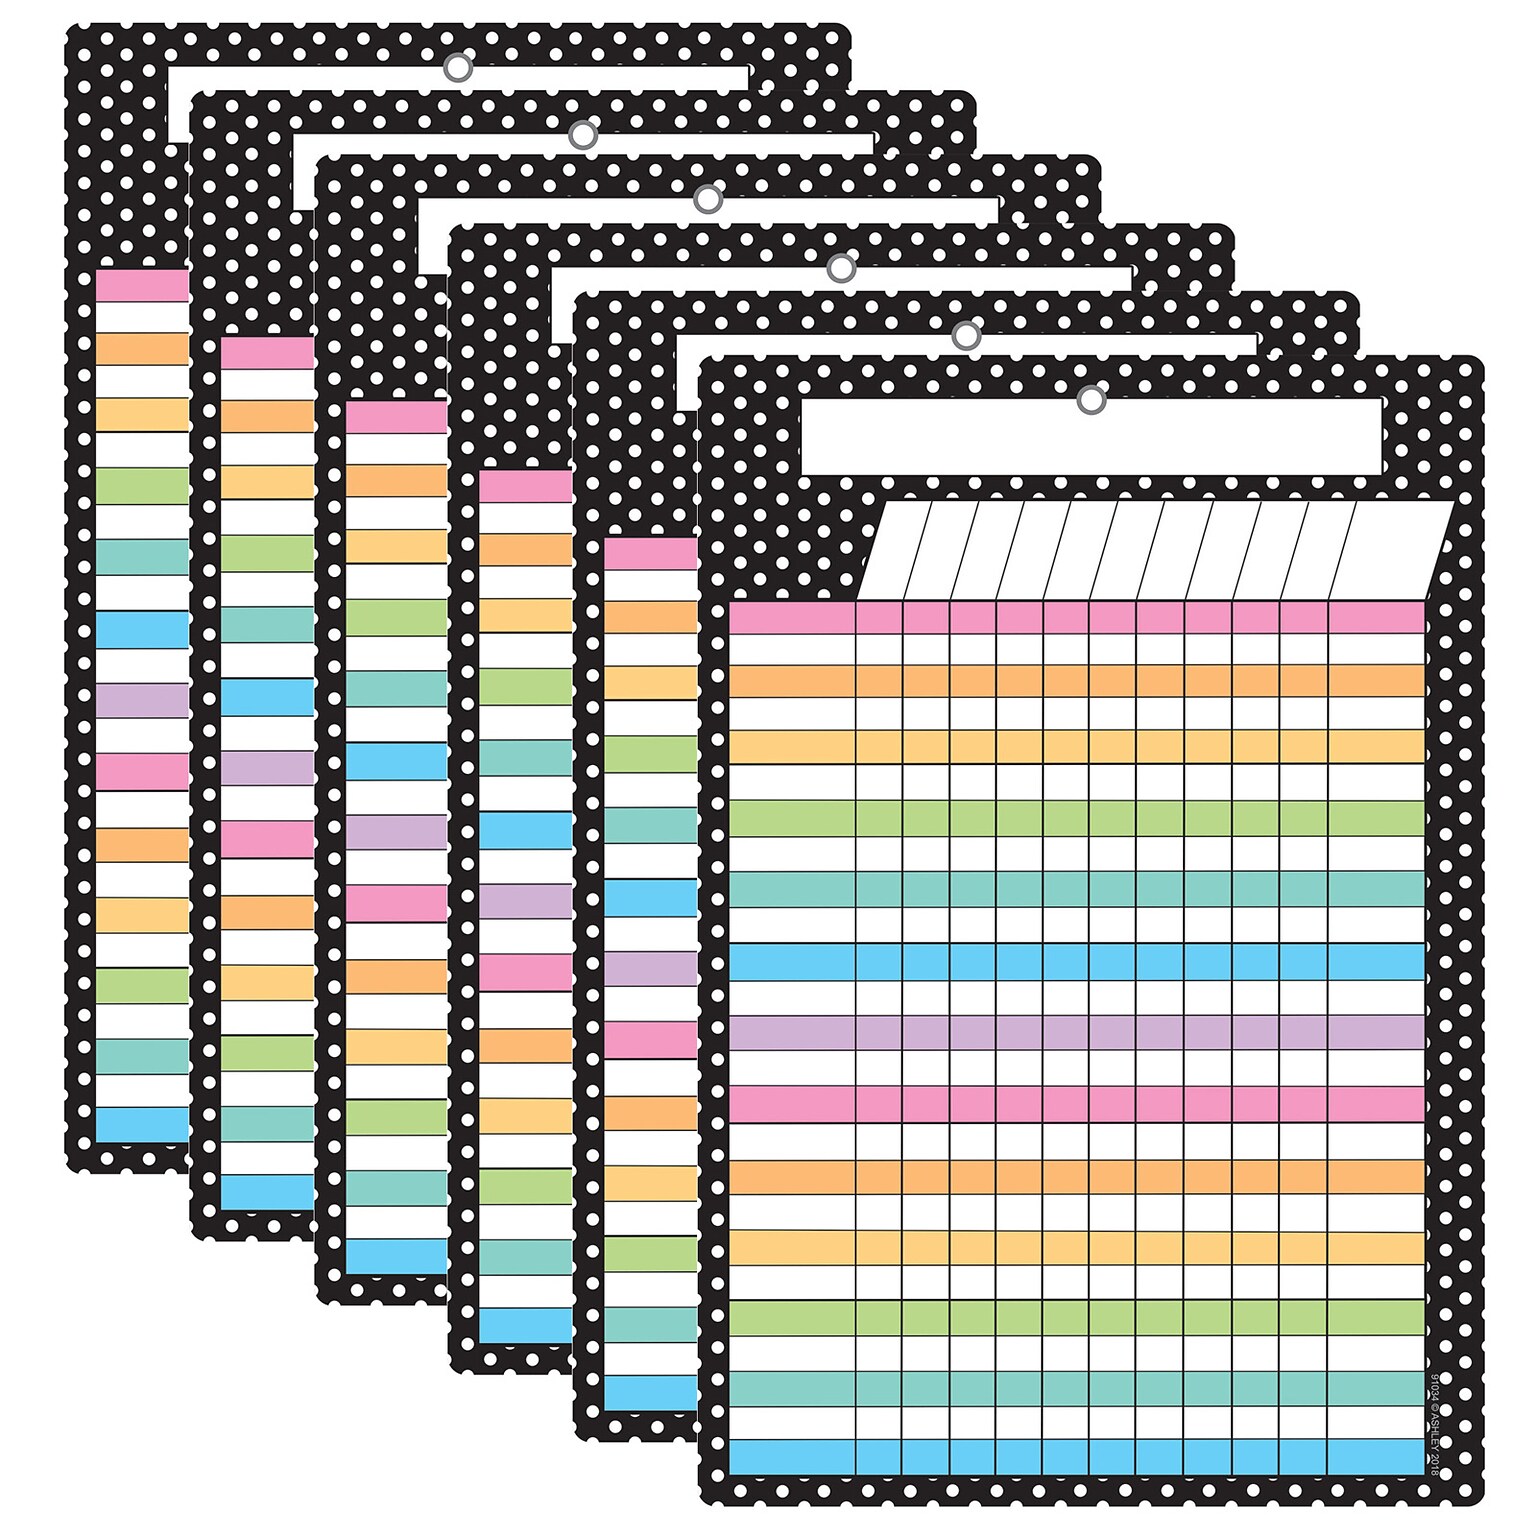 Ashley Productions Smart Poly Chart, 13 x 19, B&W Polka Dots Incentive, w/Grommet, Pack of 6 (ASH91034-6)